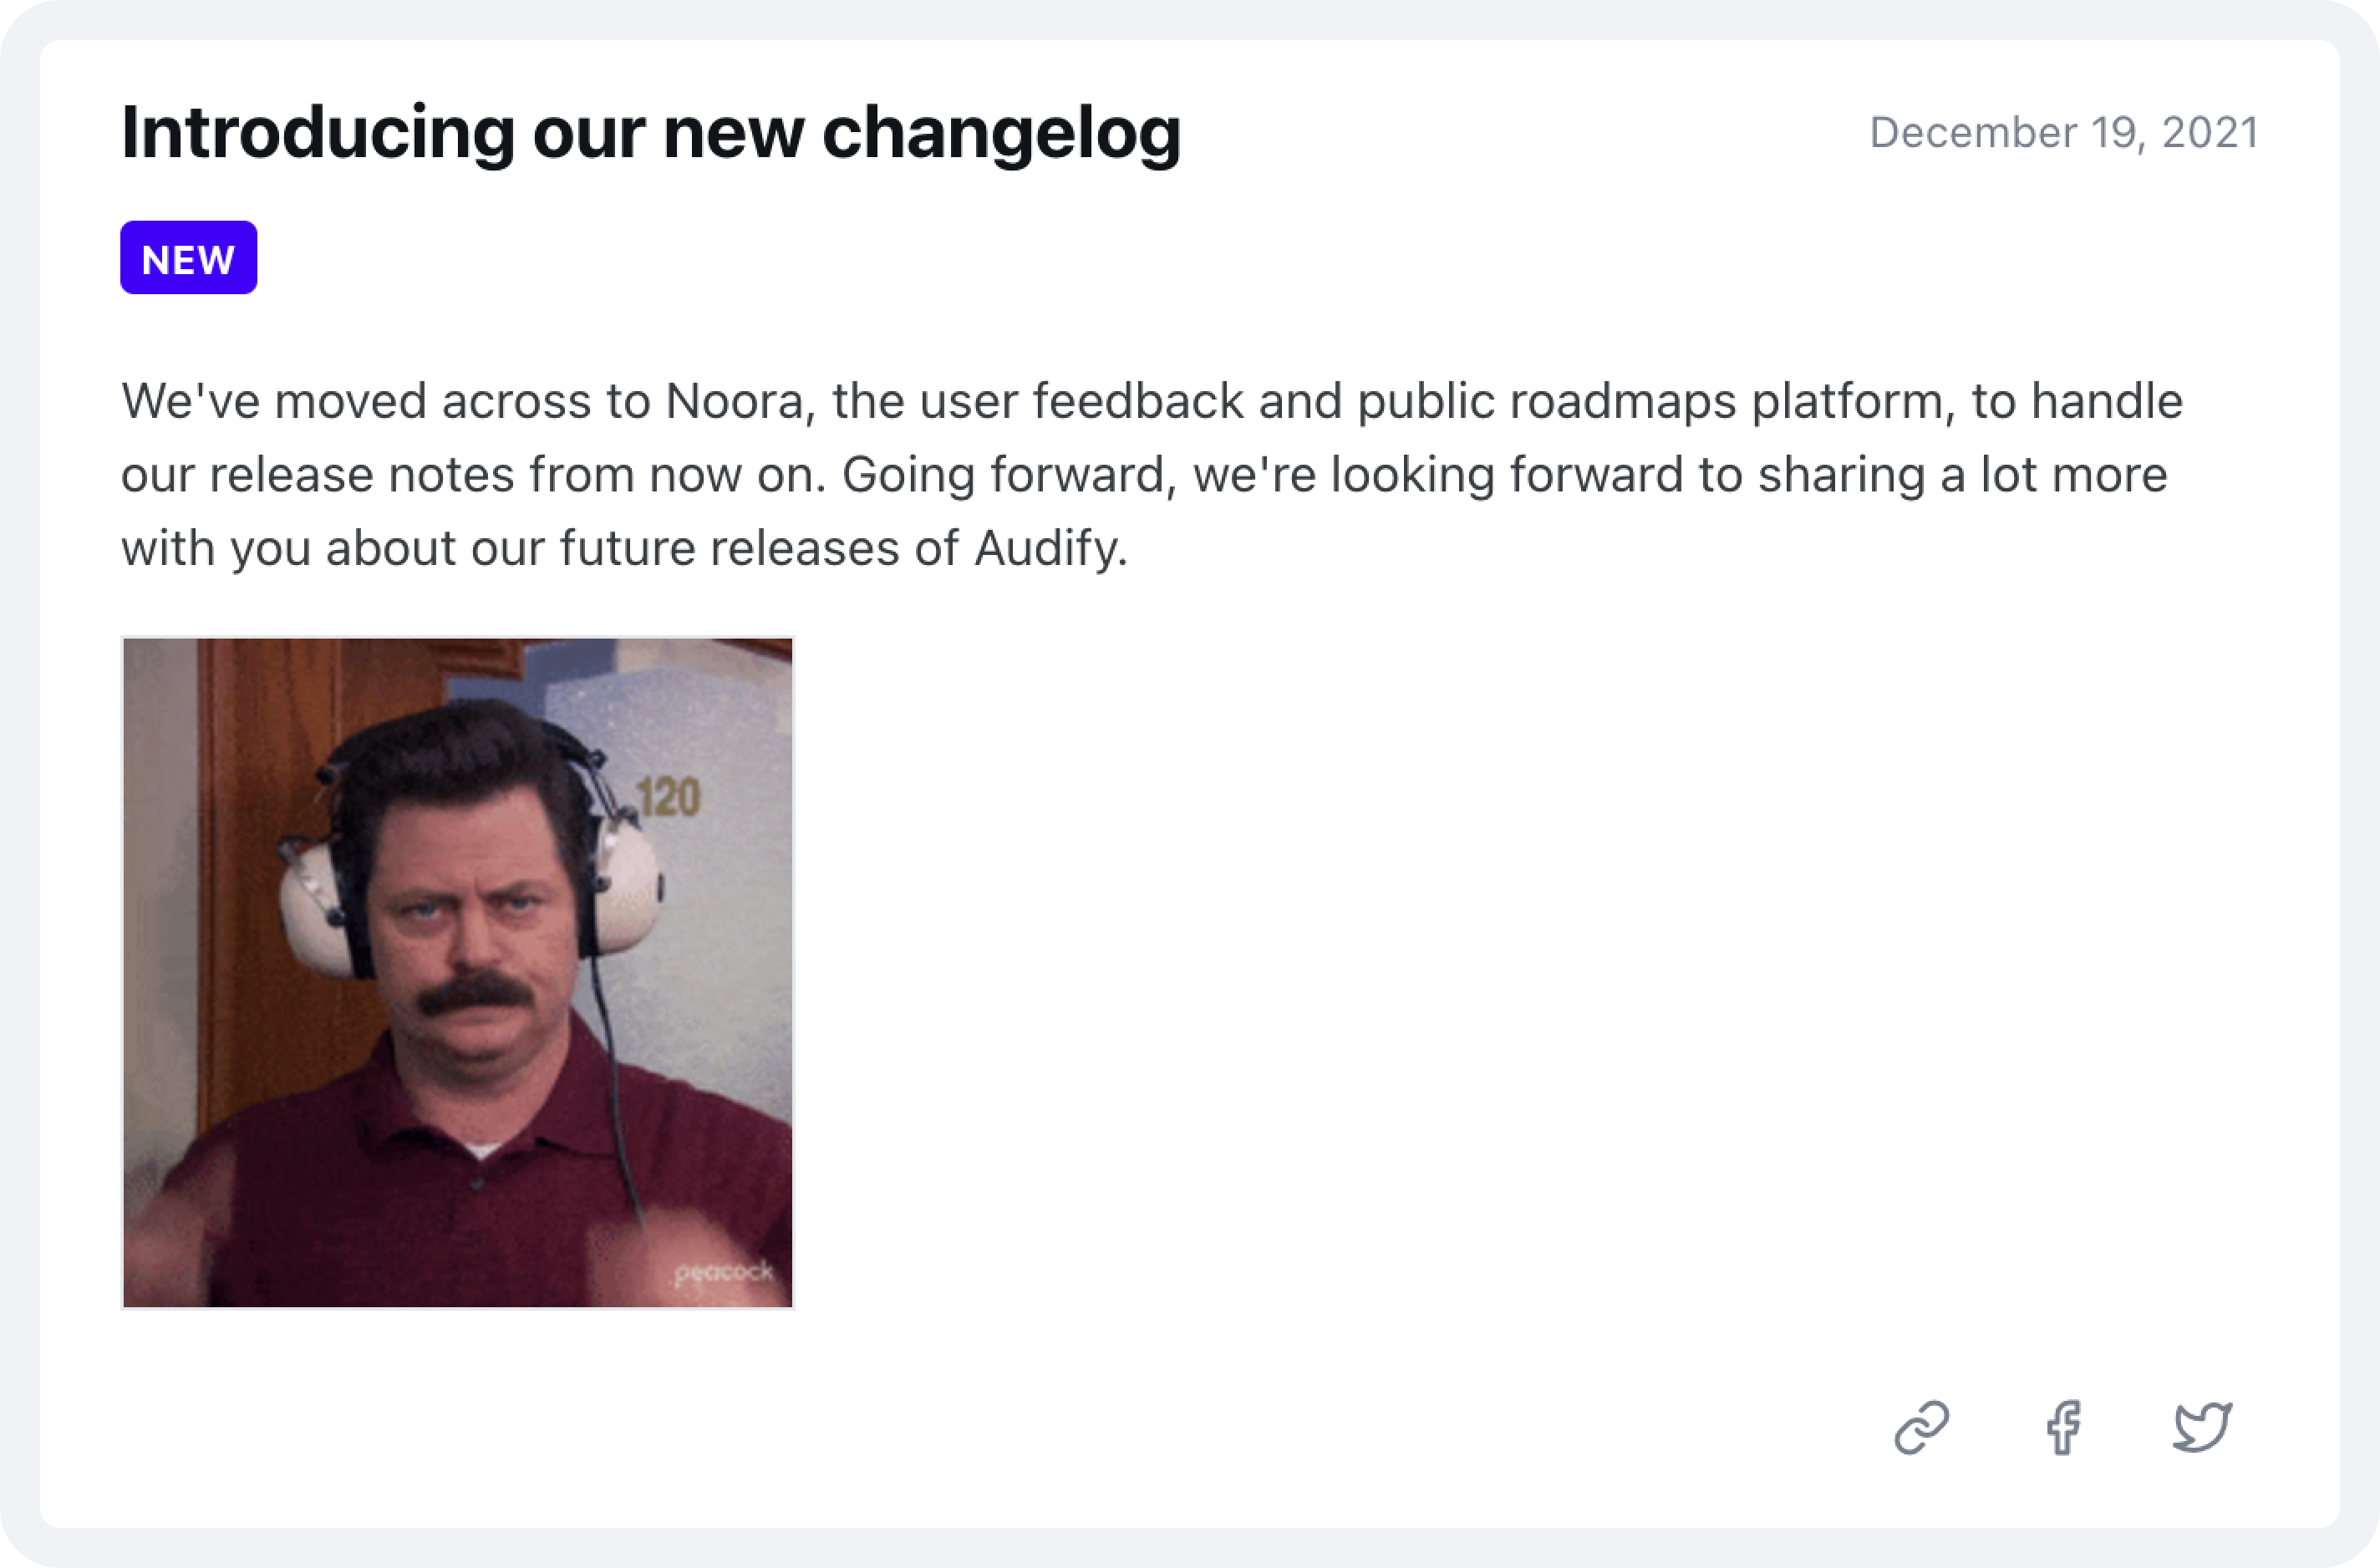 Publish changelog announcements when you release new features